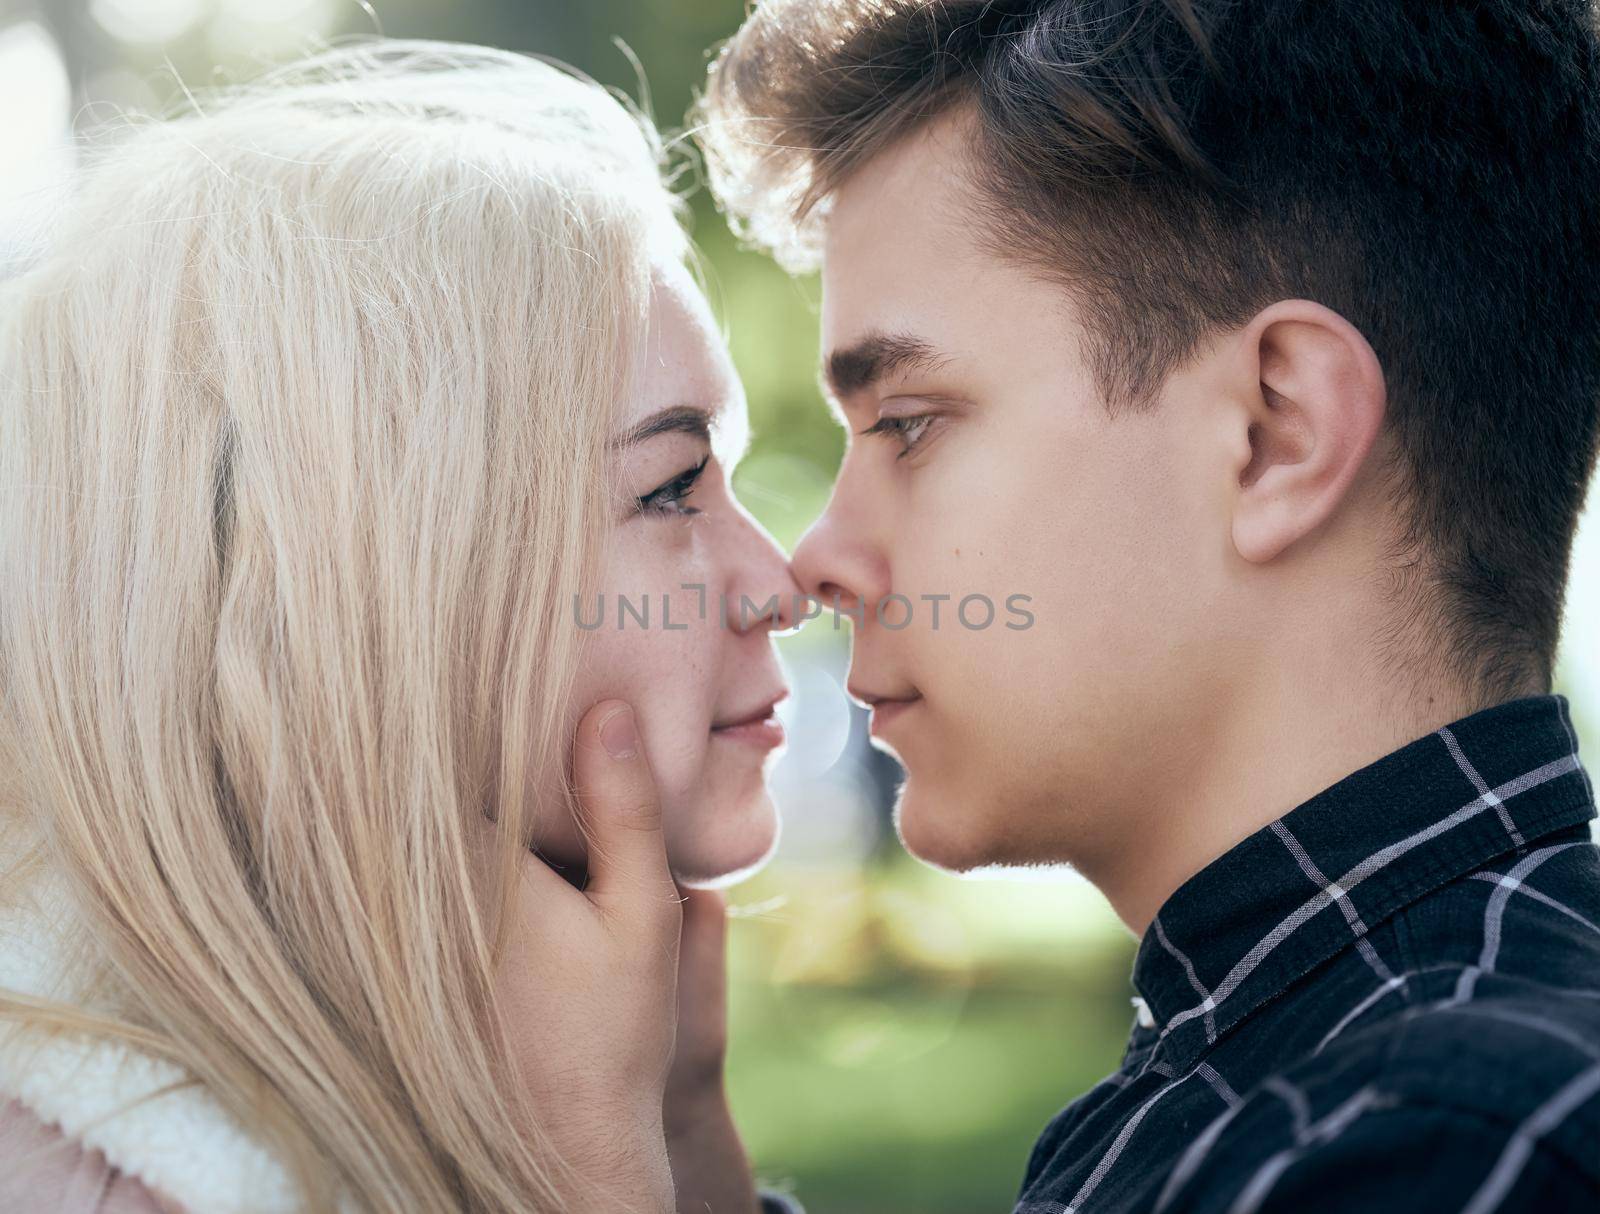 A man affectionately call looks at woman, guy and girl are worth close, touching the tips noses. Concept of teenage love and first kiss by NataBene